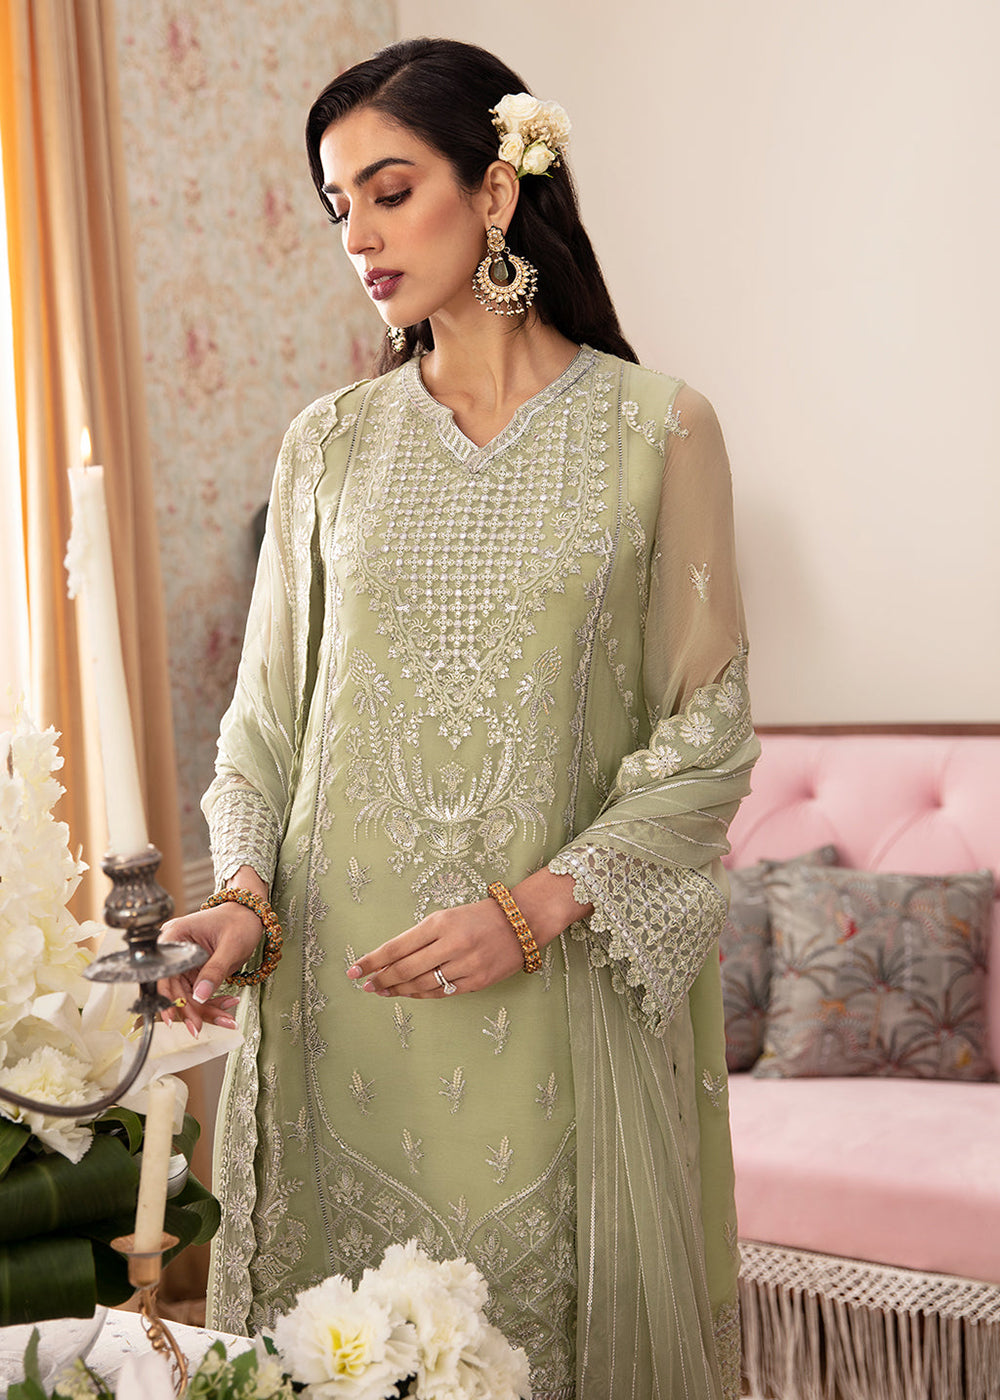 Buy Now The Whispers of Grandeur Luxury Formals '24 by Ayzel | SELINA Online at Empress Online in USA, UK, Canada & Worldwide at Empress Clothing.